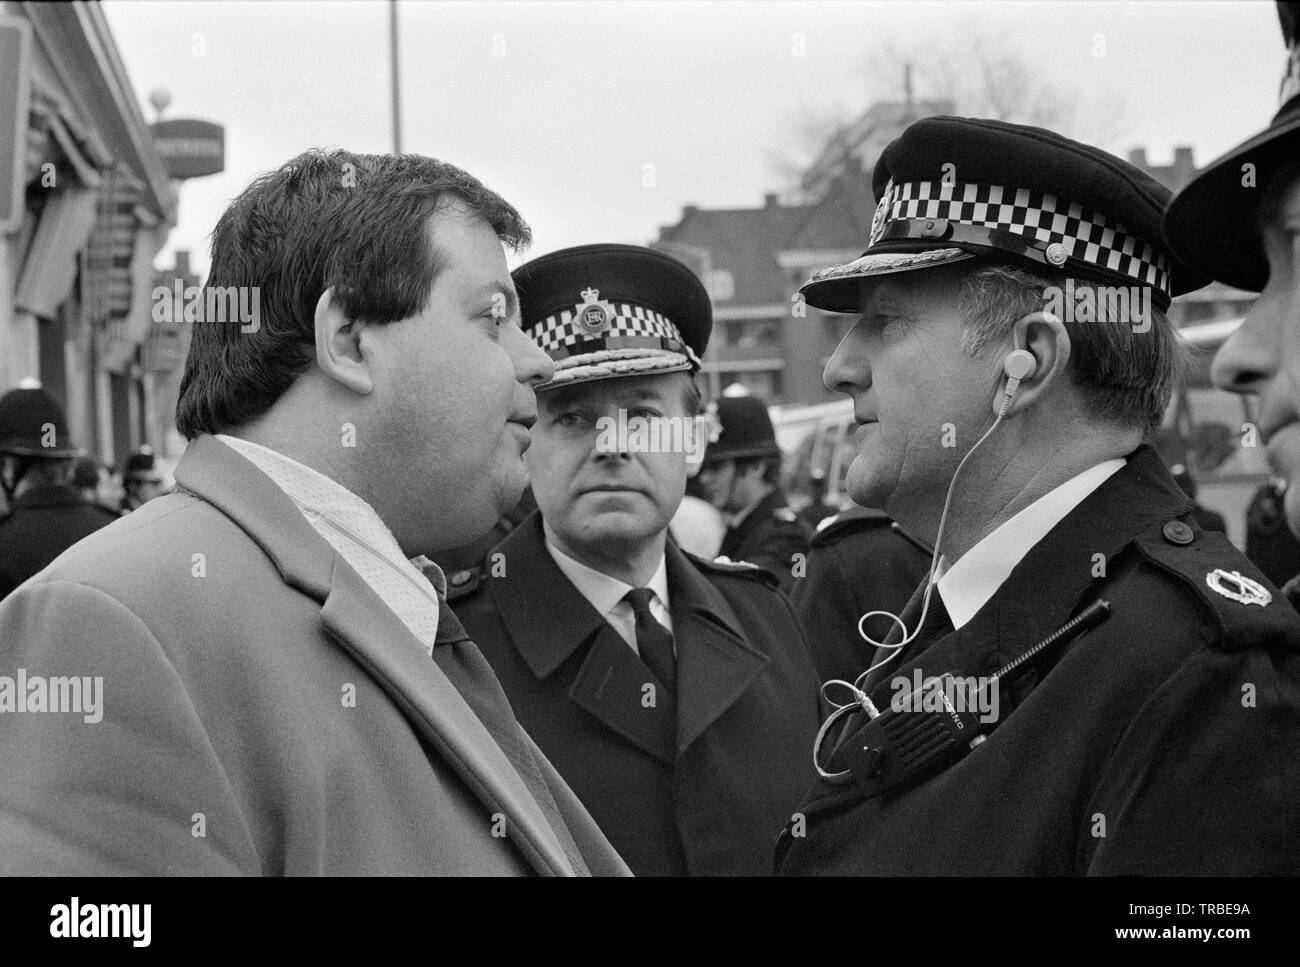 1980. A march by the National Front, a British Far Right Fascist Political Party, in Camberwell New Road, London, headed by its then leader Martin Webster, who is seen talking to the police. Stock Photo